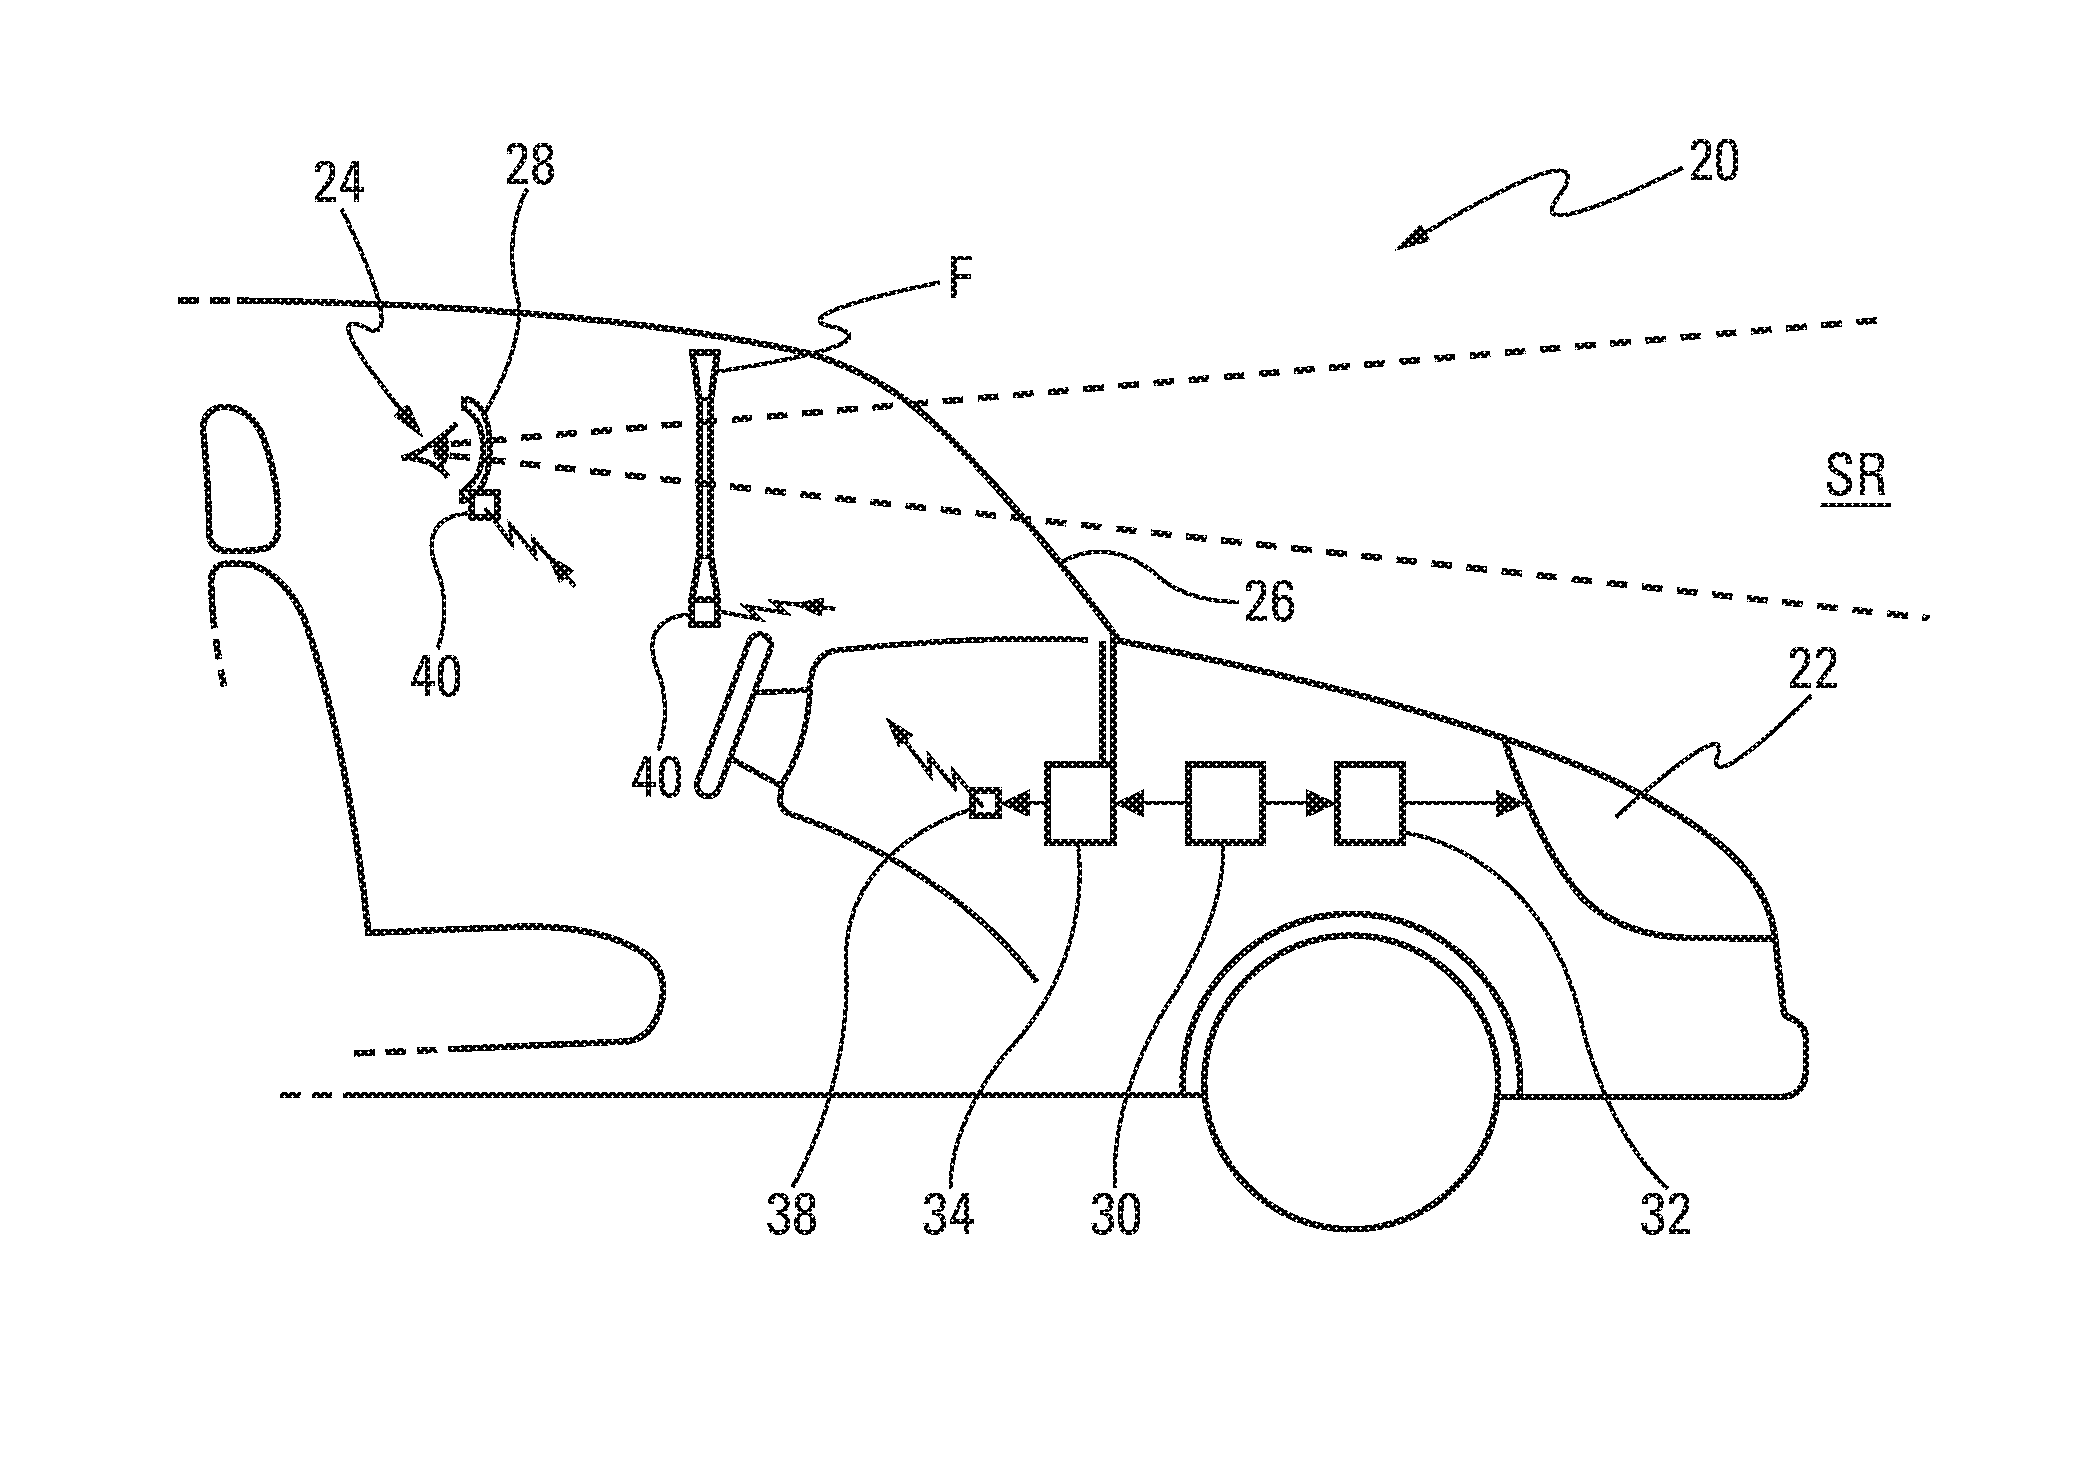 Driving assistance method and device